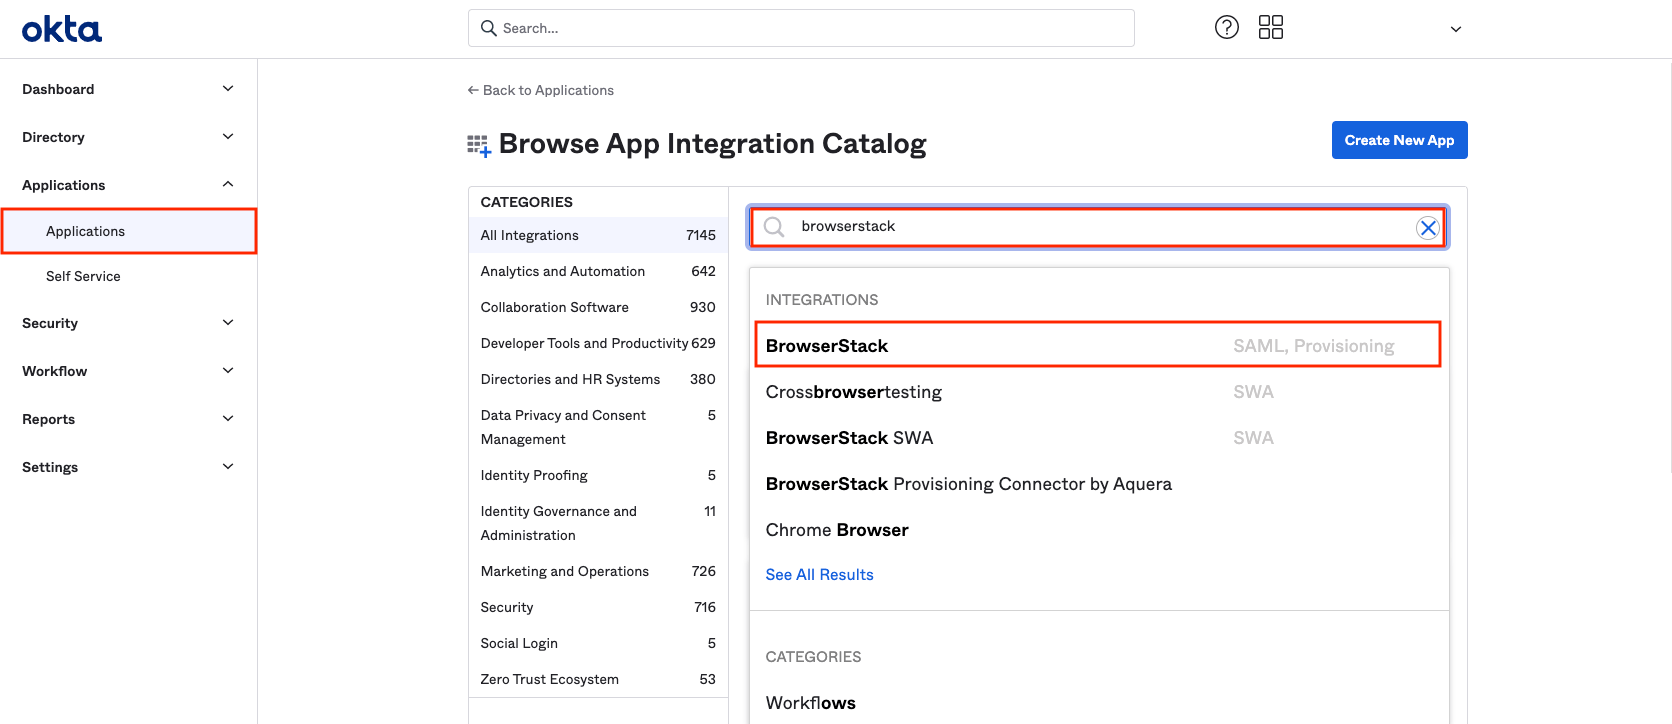 Find browserStack app under applications on okta and add it to your okta tenant